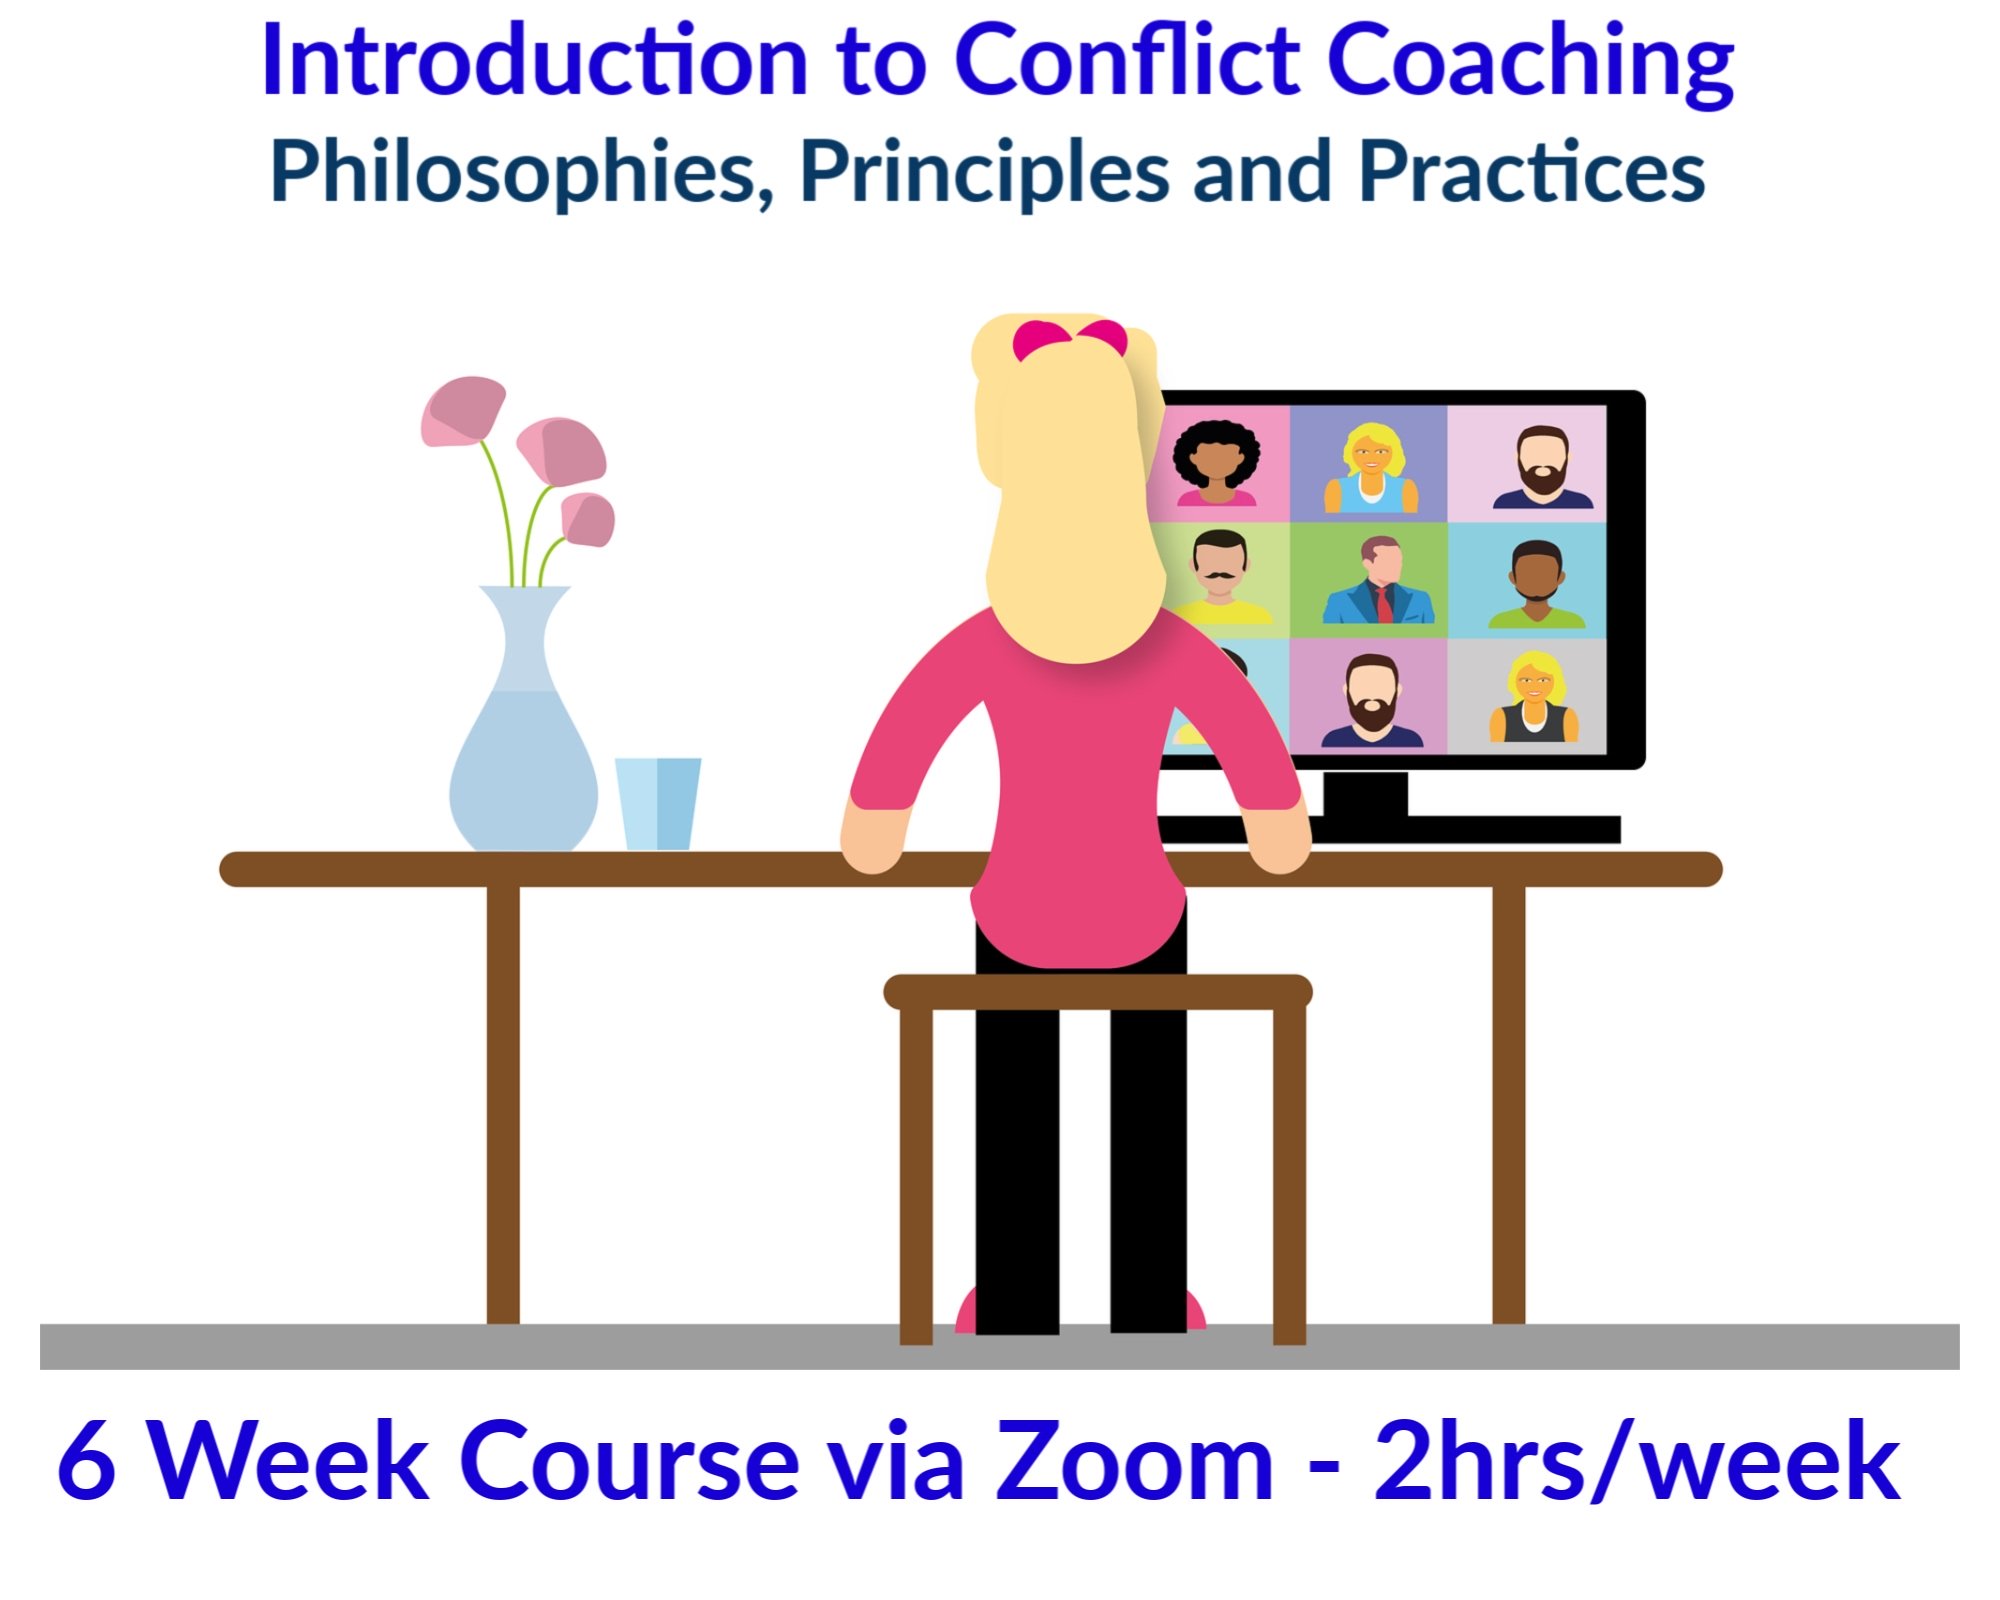 Online Conflict Coaching Training (CAOS Model)